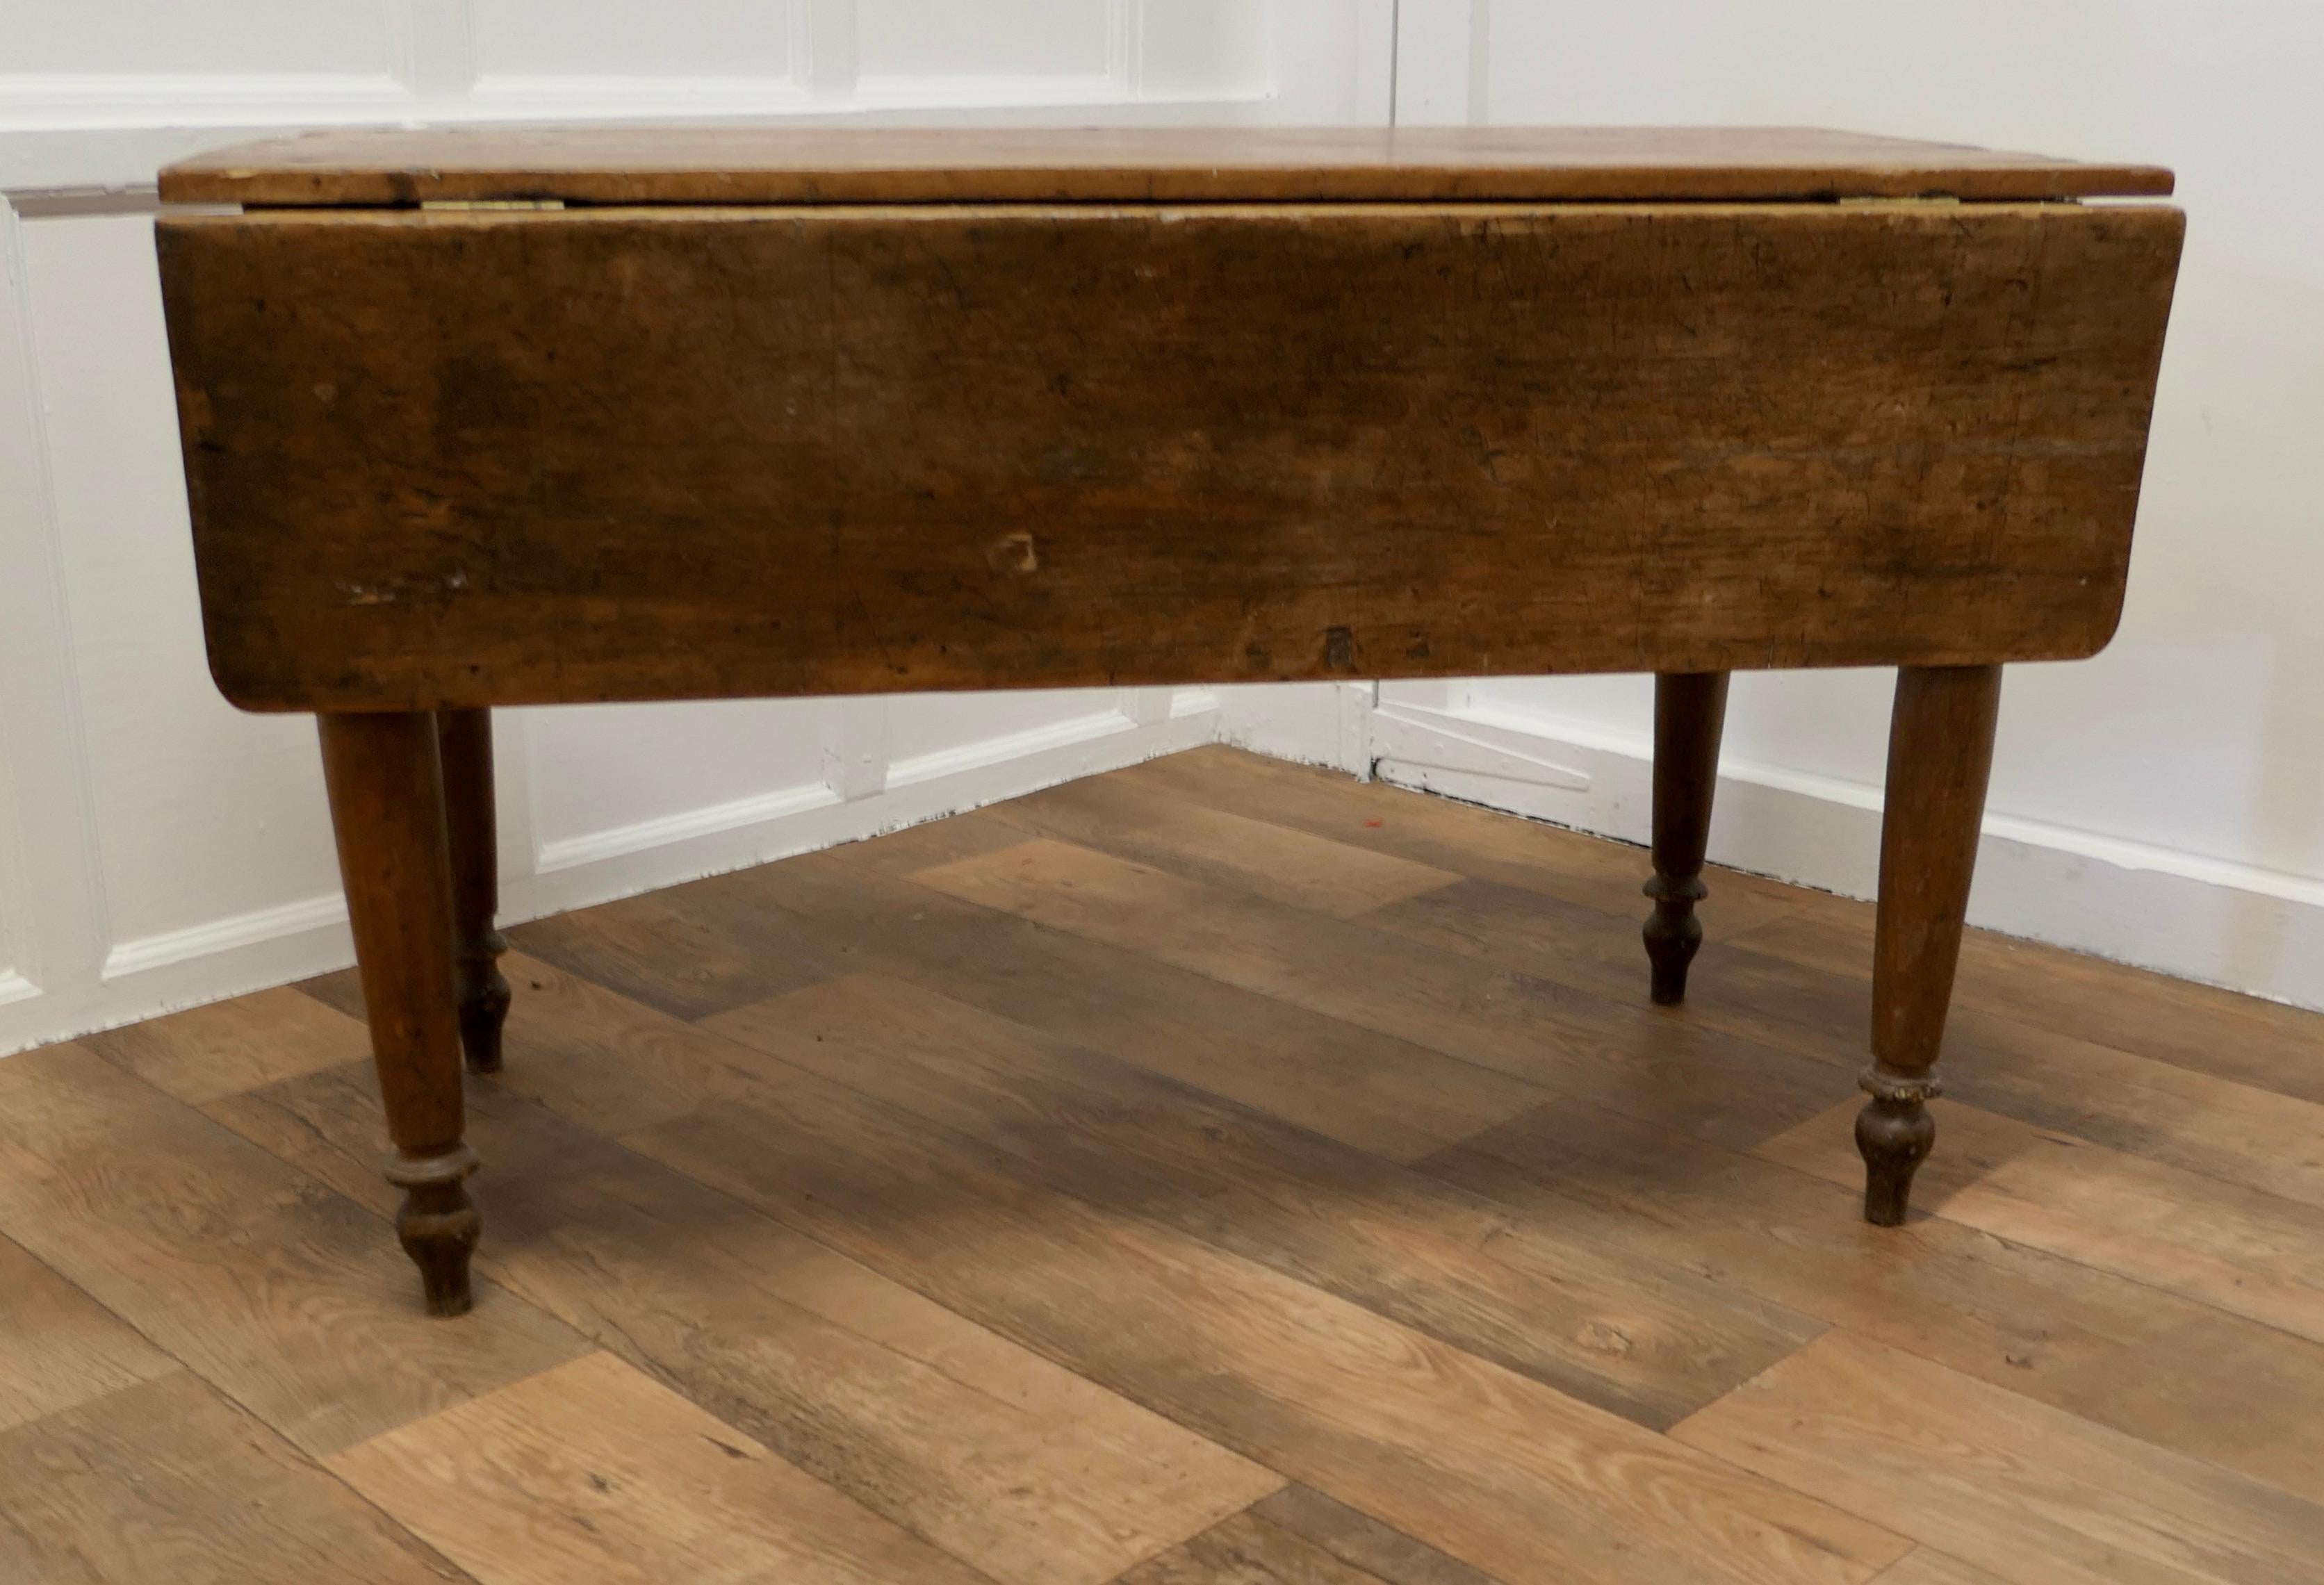 Antique Pine Drop Leaf Cottage Dining Table

This type of table is often know as a cottage diner because it is space saving with the leaves down and opens to a good size dining table when needed 

The table has a solid age darkened pine finish